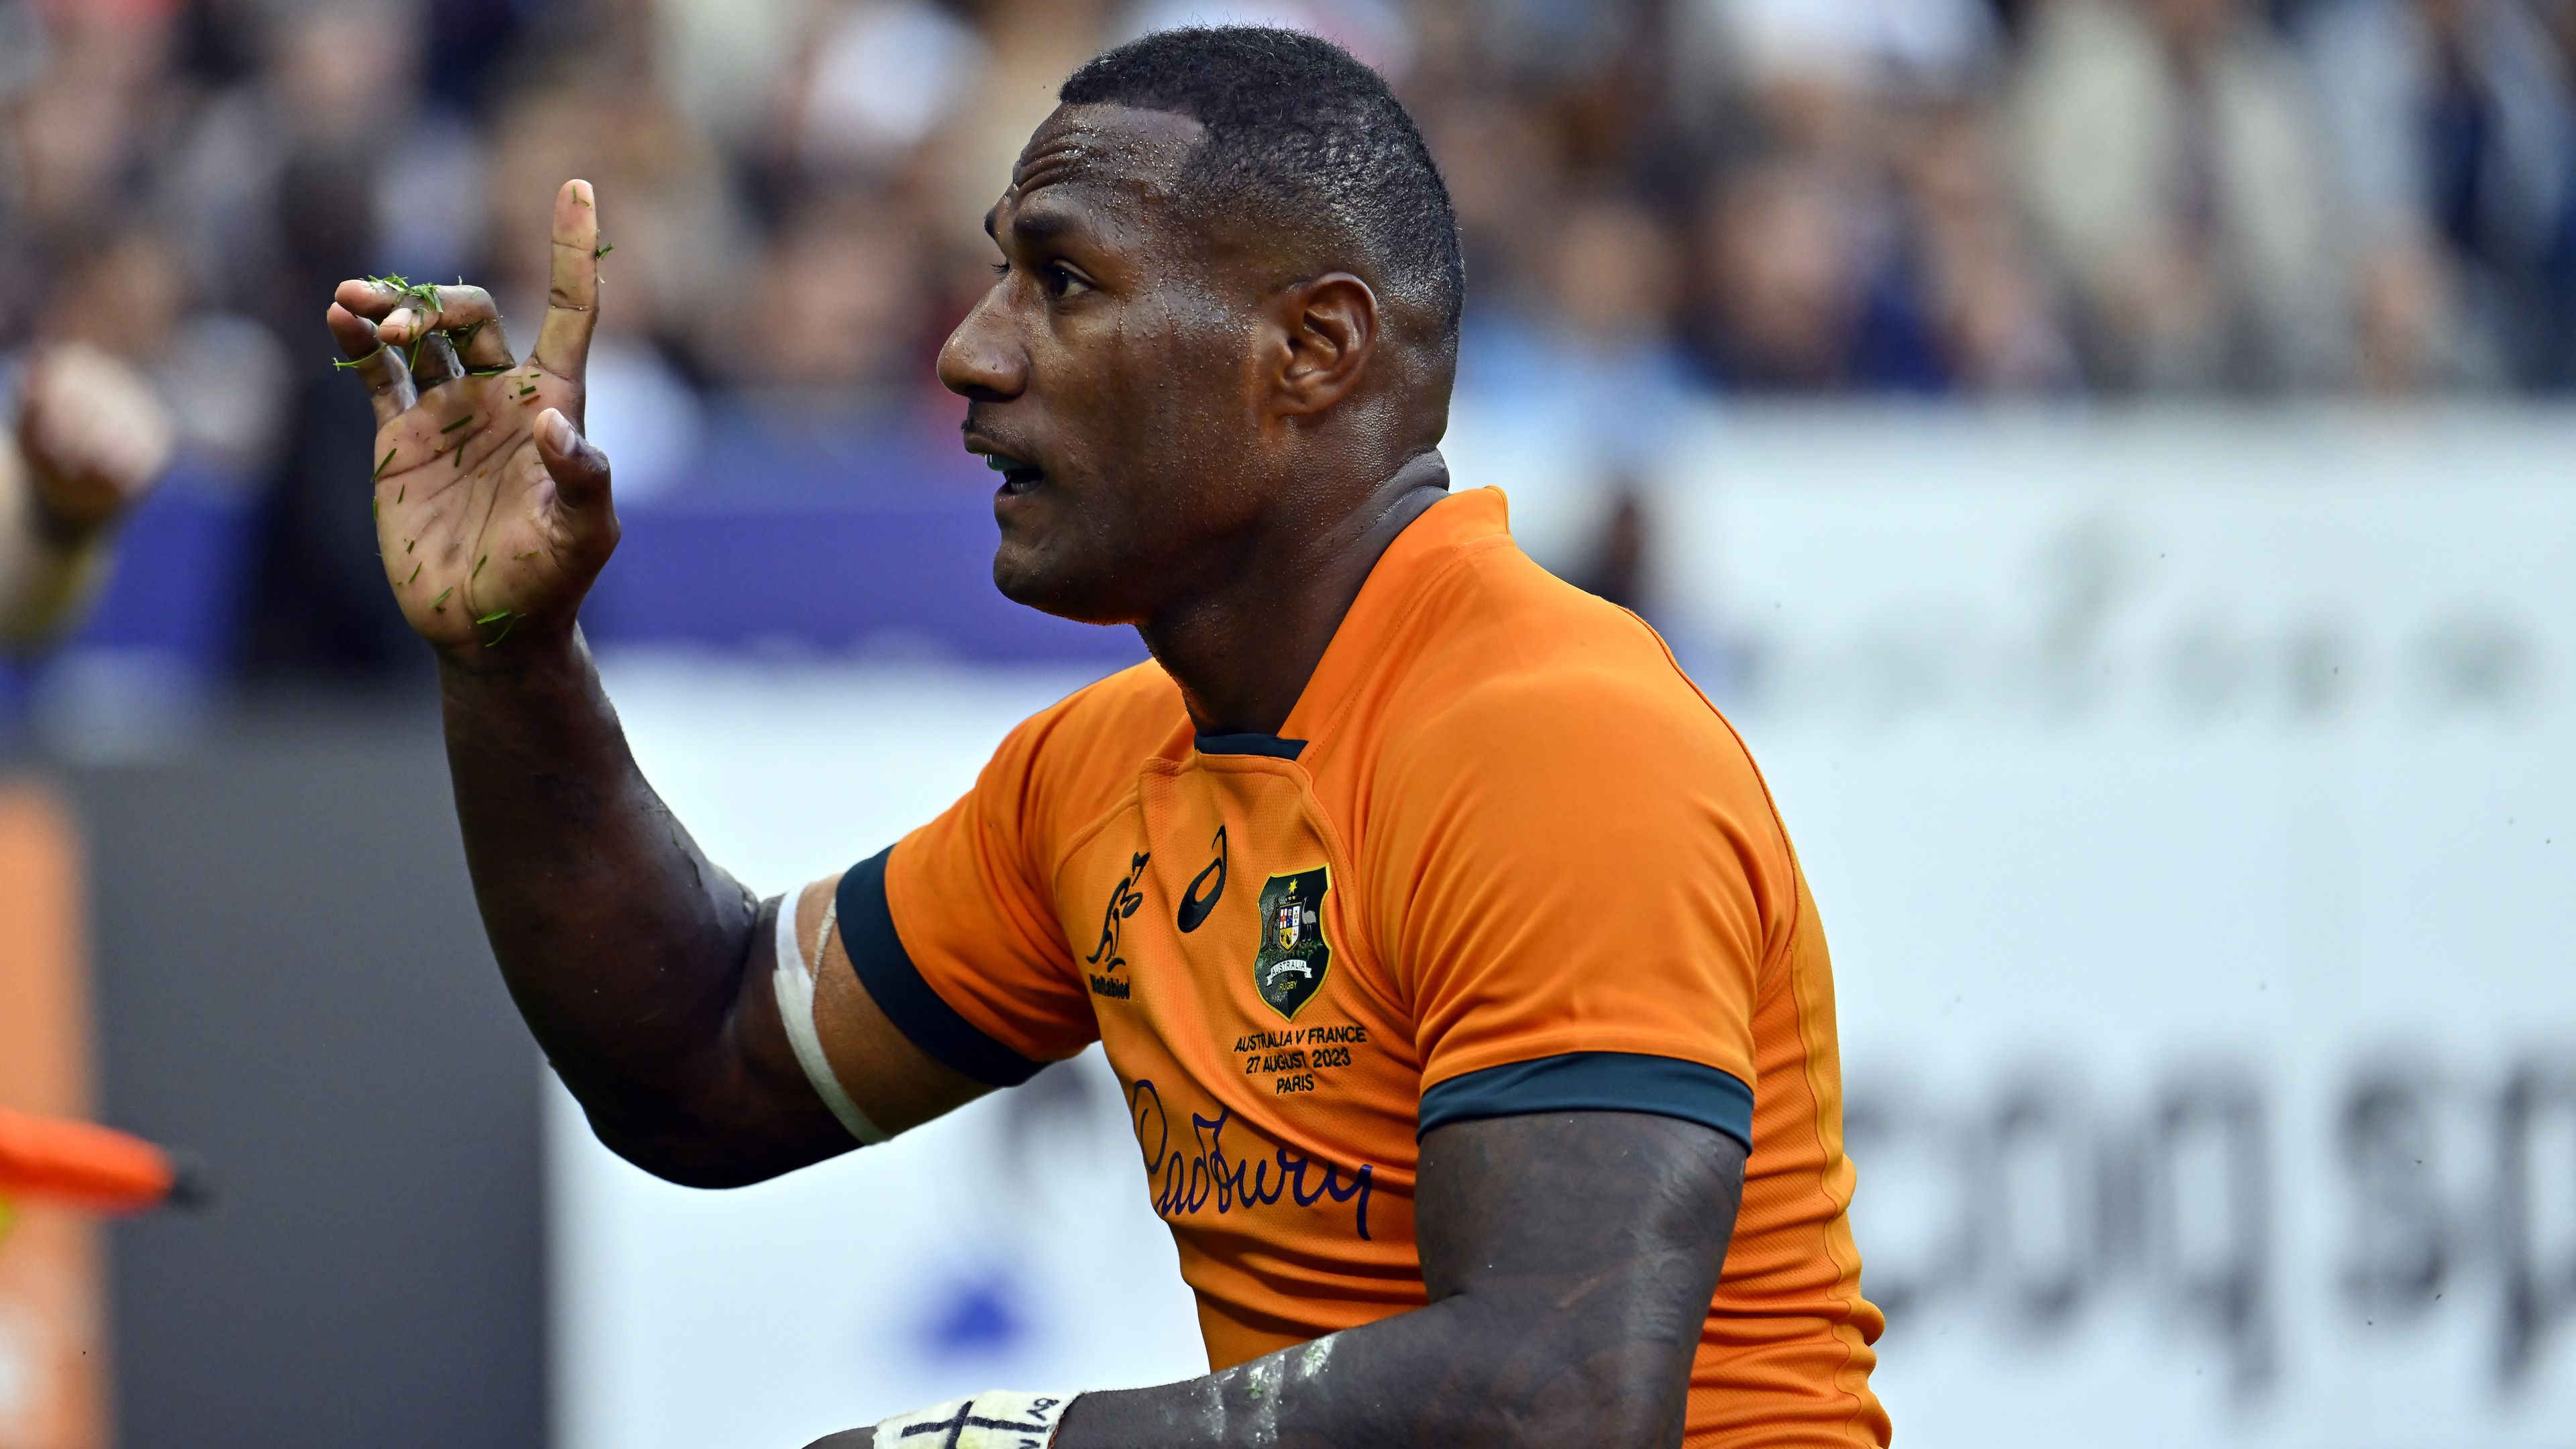 Suliasi Vunivalu of Australia reacts after scoring a try.